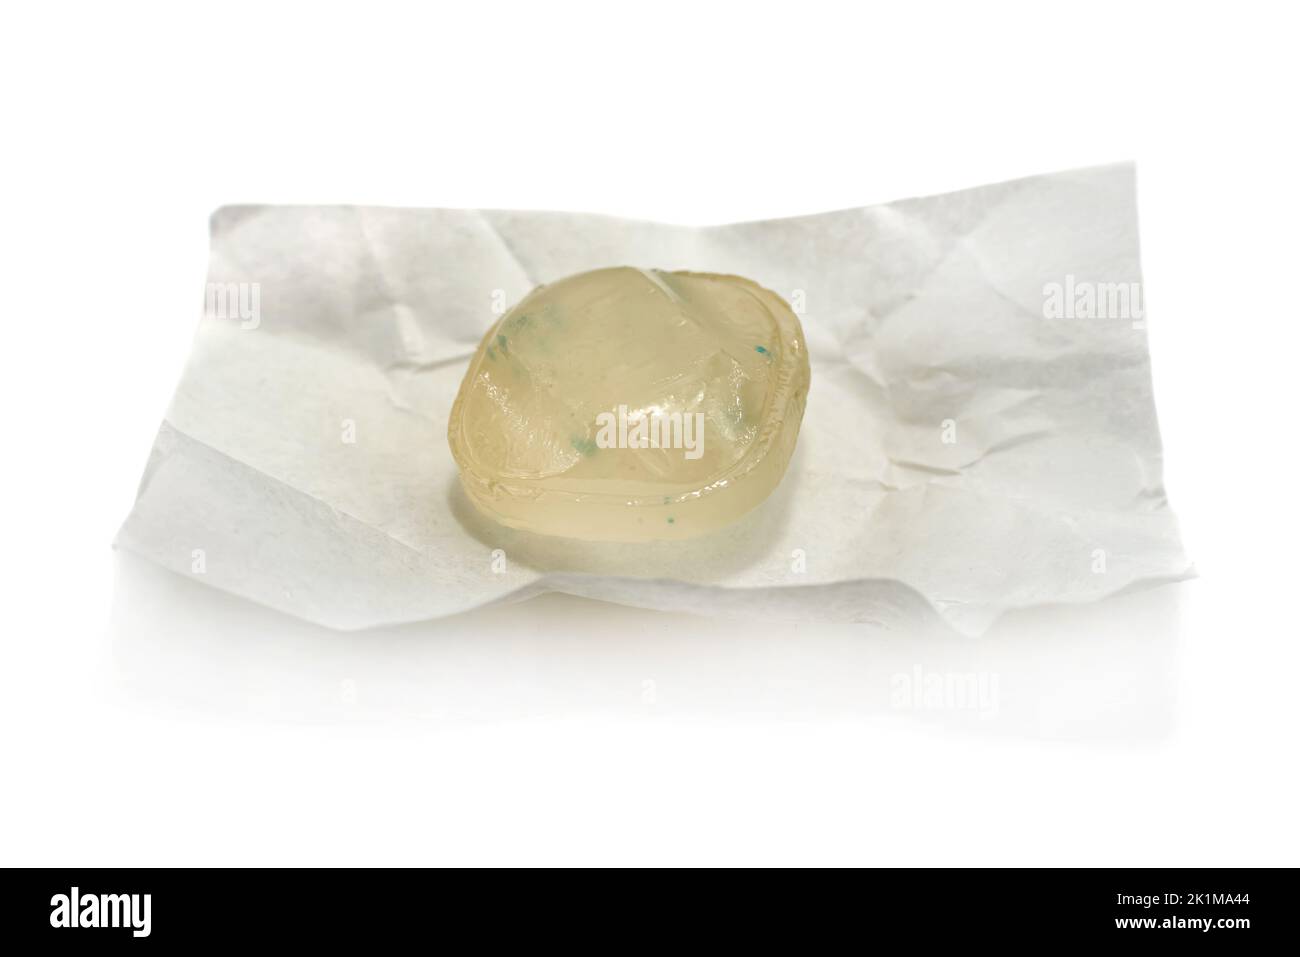 Menthol lozenges for cough and sore throat on a white background. Menthol. Lollipop Stock Photo